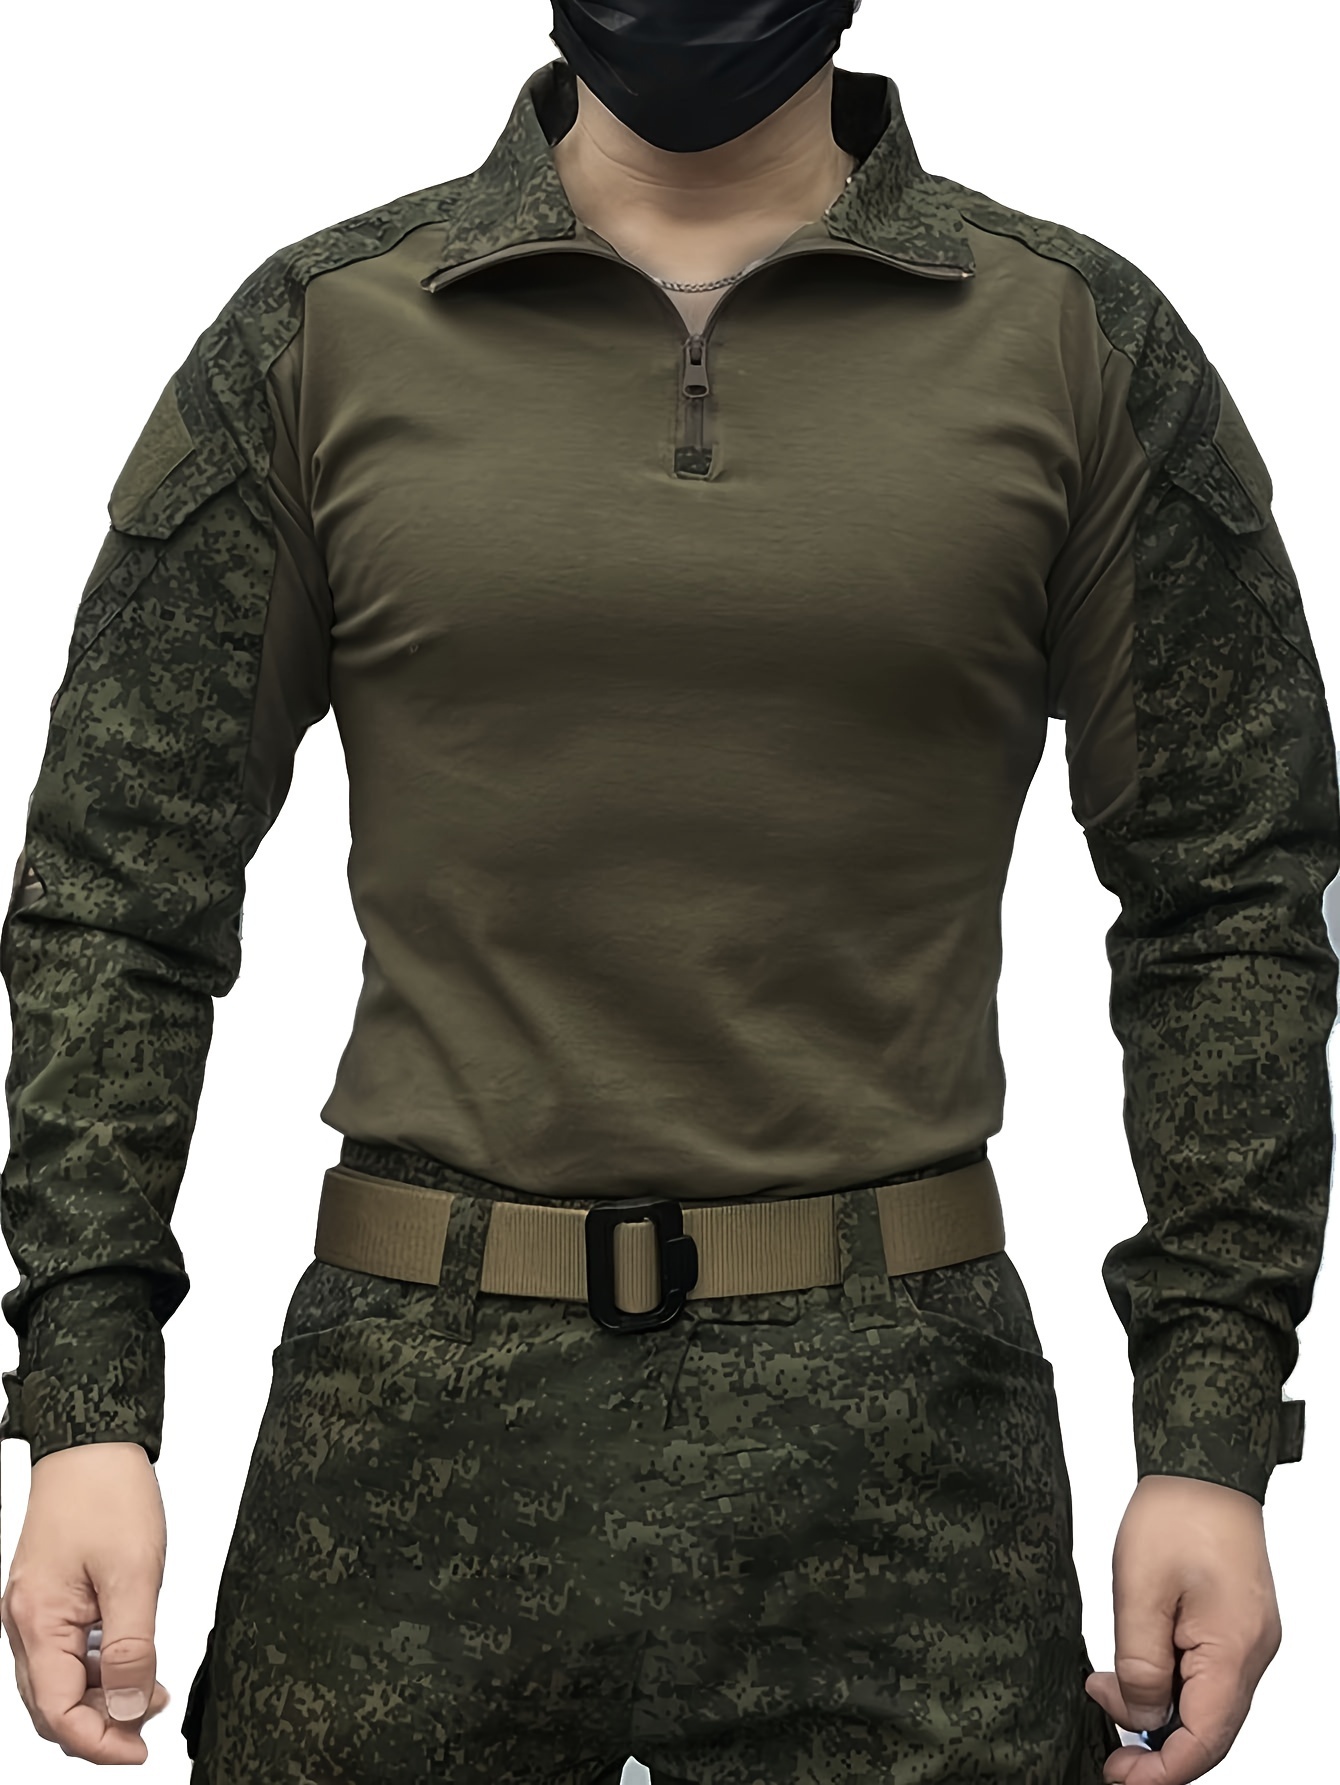 Color Block Men's Long Sleeve Slim Fit Cotton Comfy Tactical Top with Half Zipper and Pocket Design, Perfect for Hiking, Hunting, Climbing, Camping